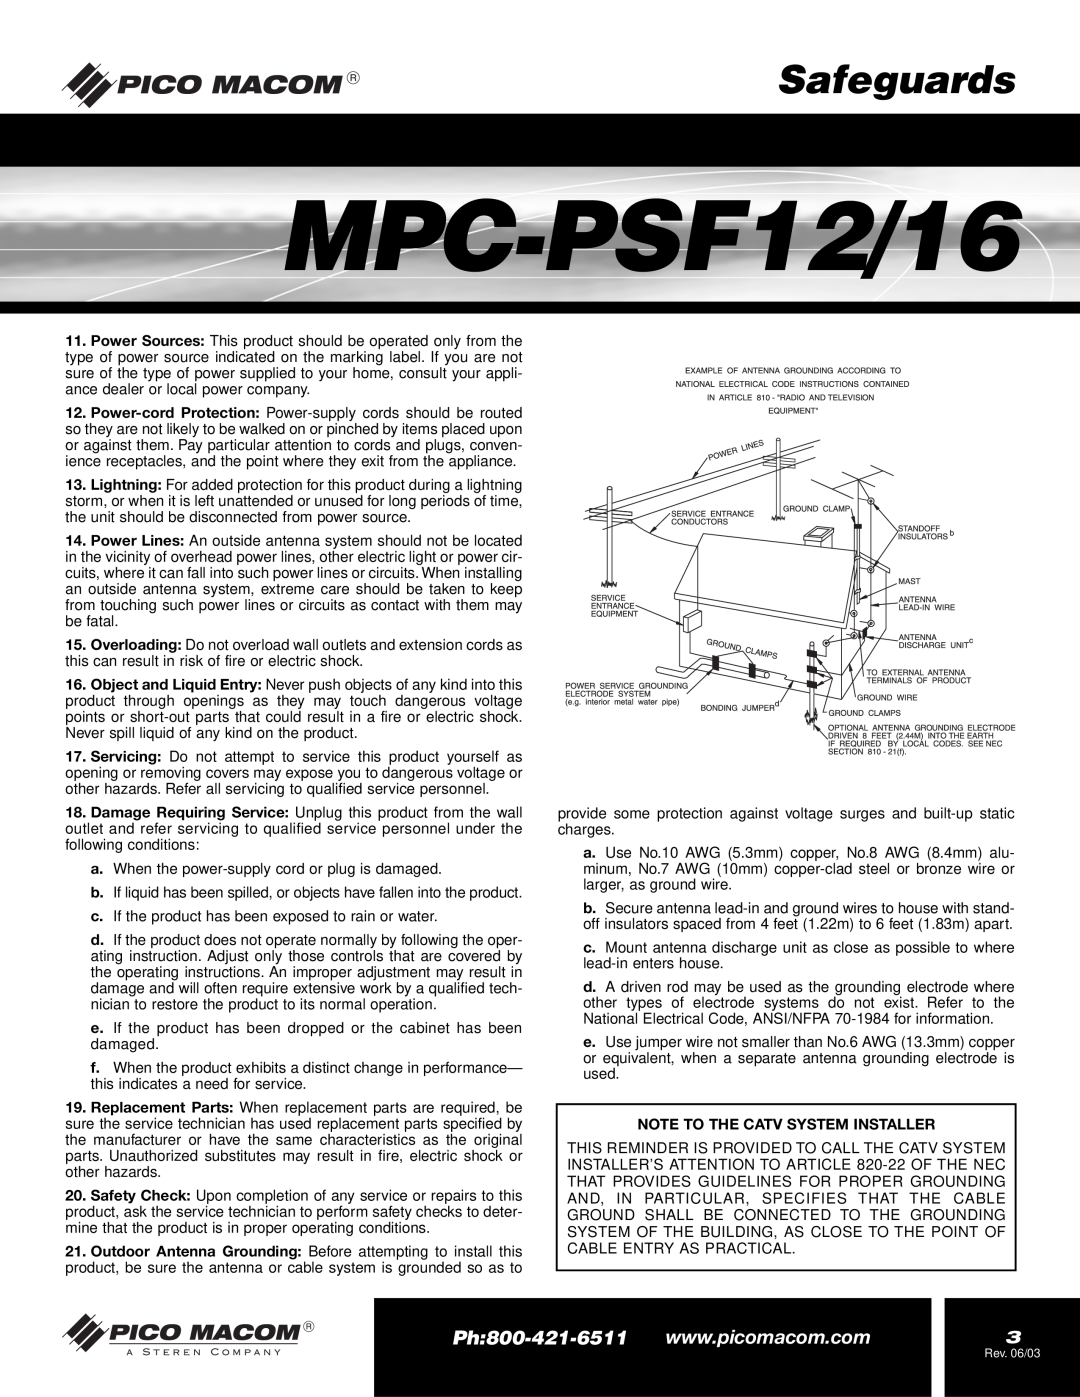 Pico Macom MPC-PSF16 operation manual MPC-PSF12/16, Safeguards, Note To The Catv System Installer 